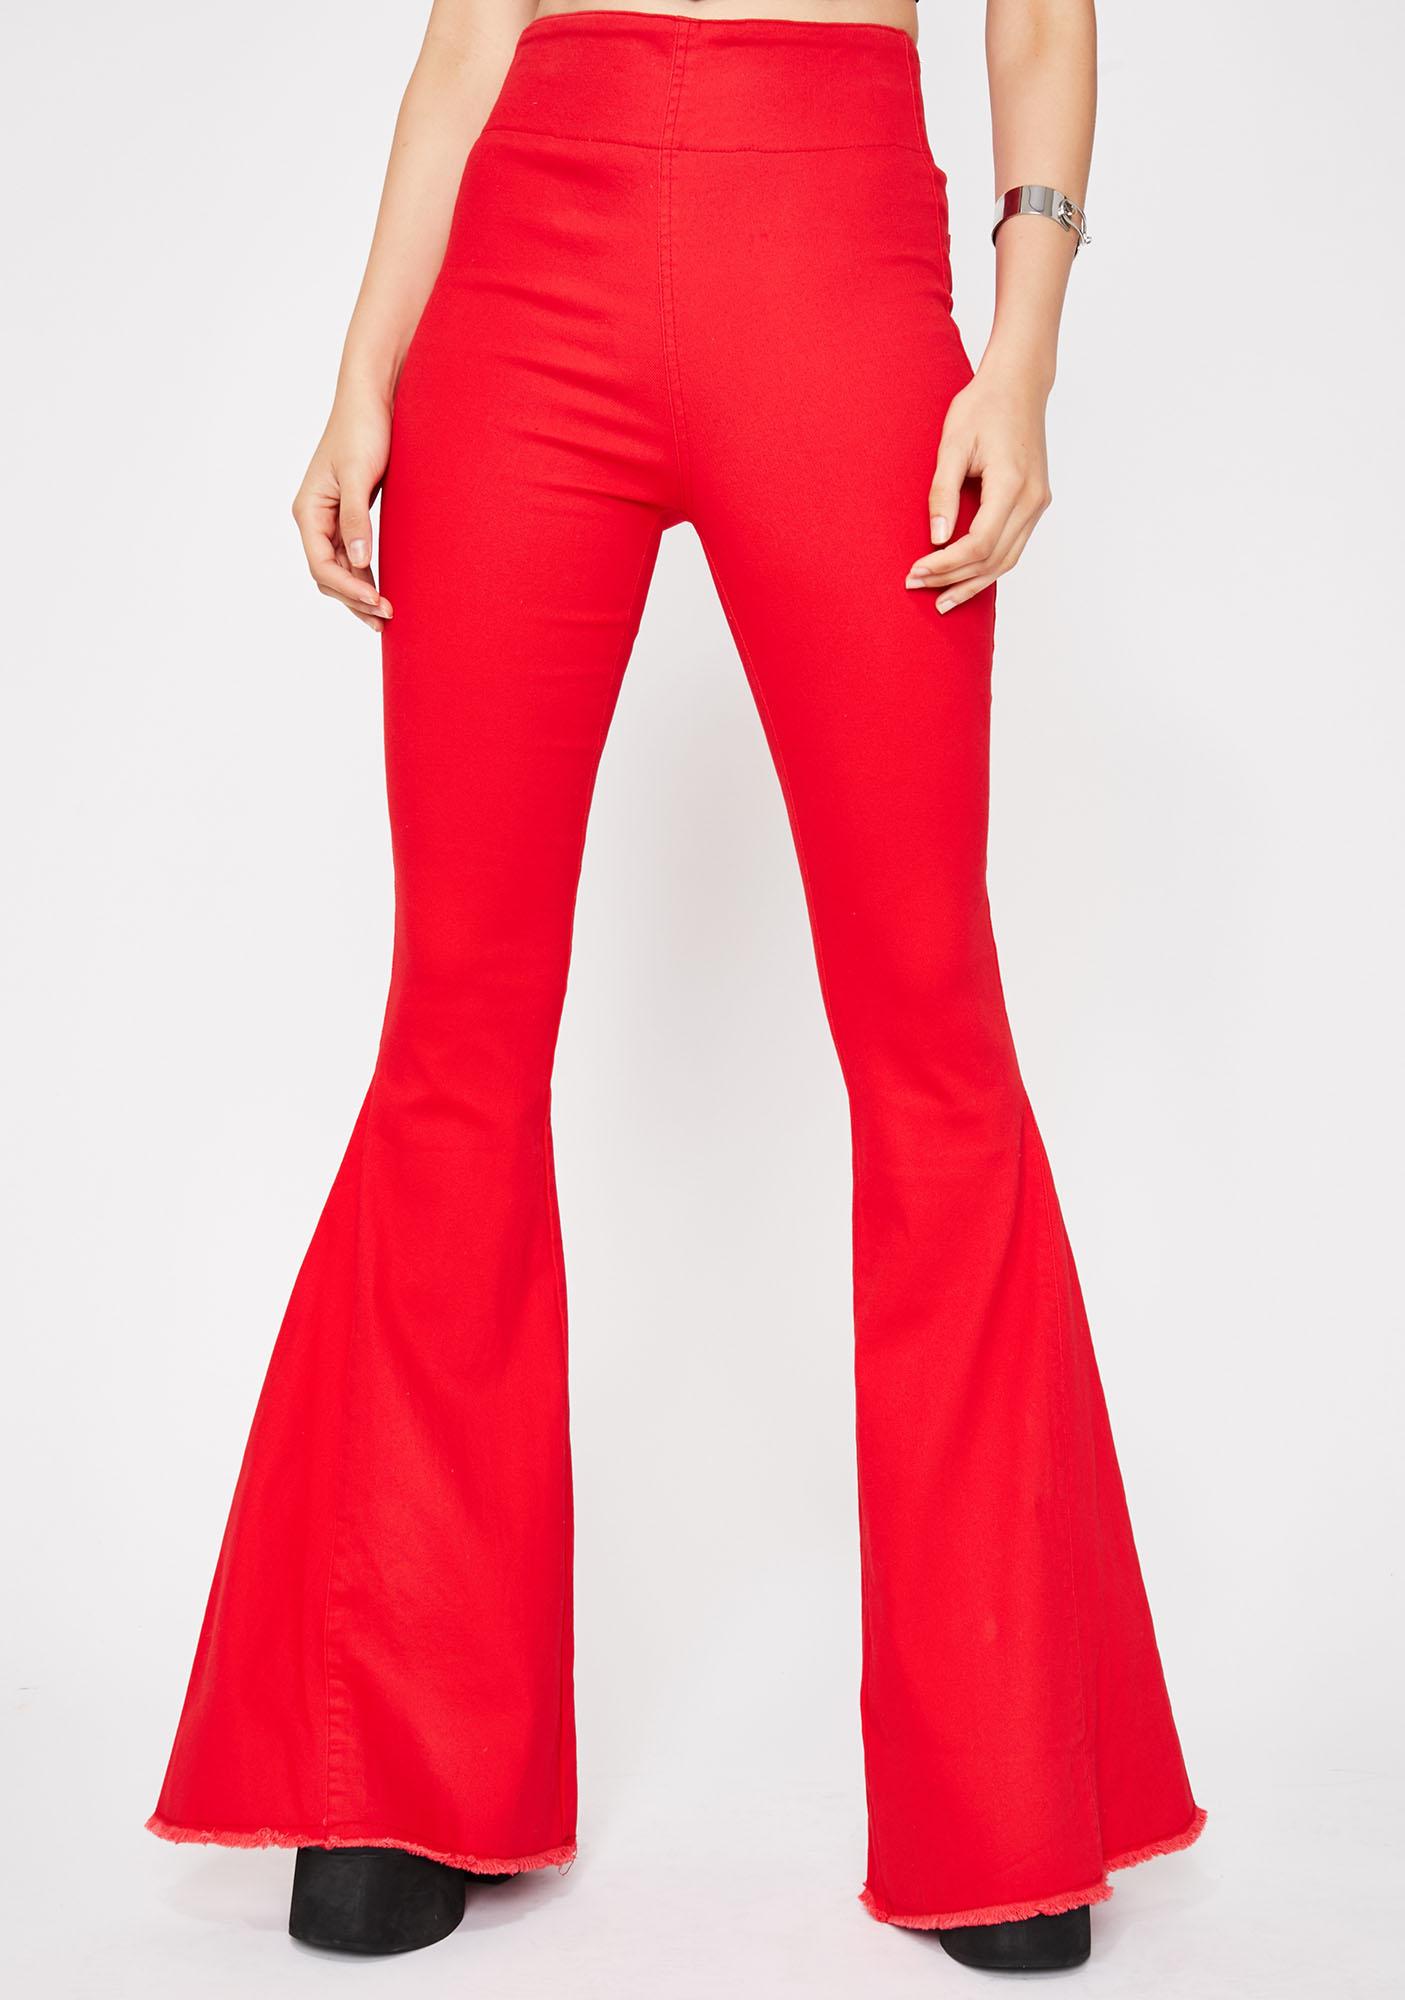 red bell bottom jeans